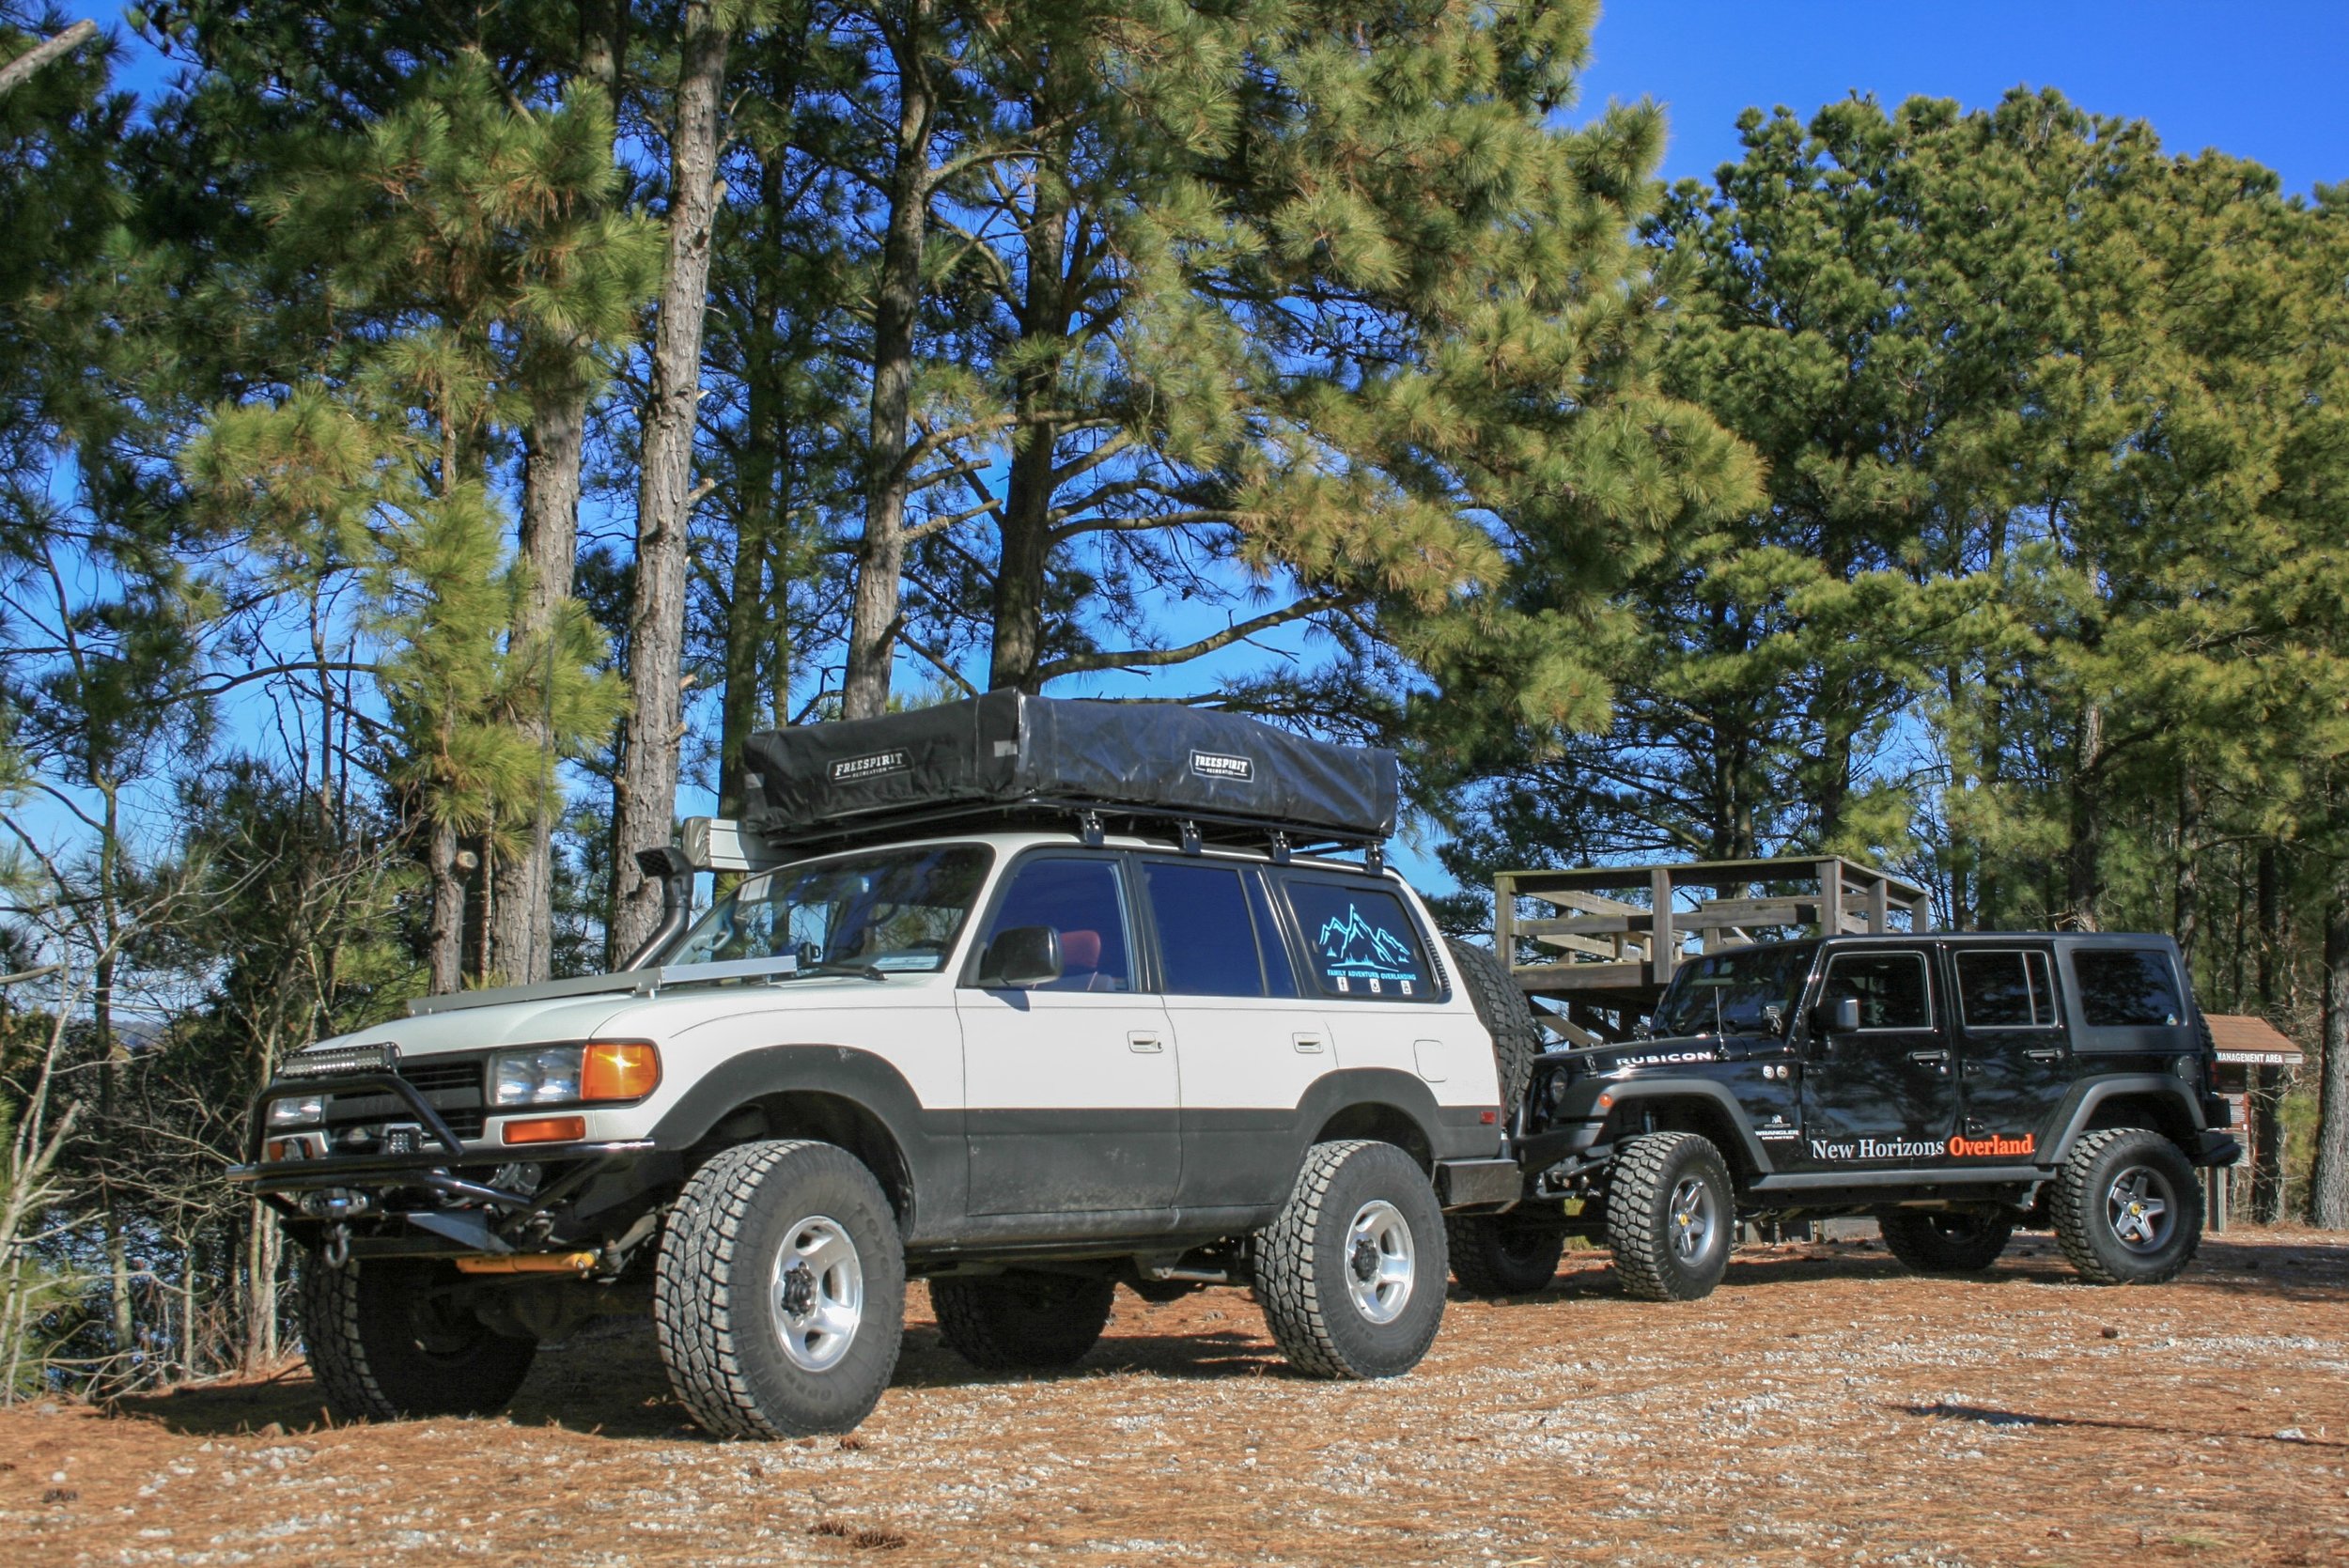  The Family Adventures Overlanding 80 series Land Cruiser and the JKUR of New Horizons Overland out on an adventure 